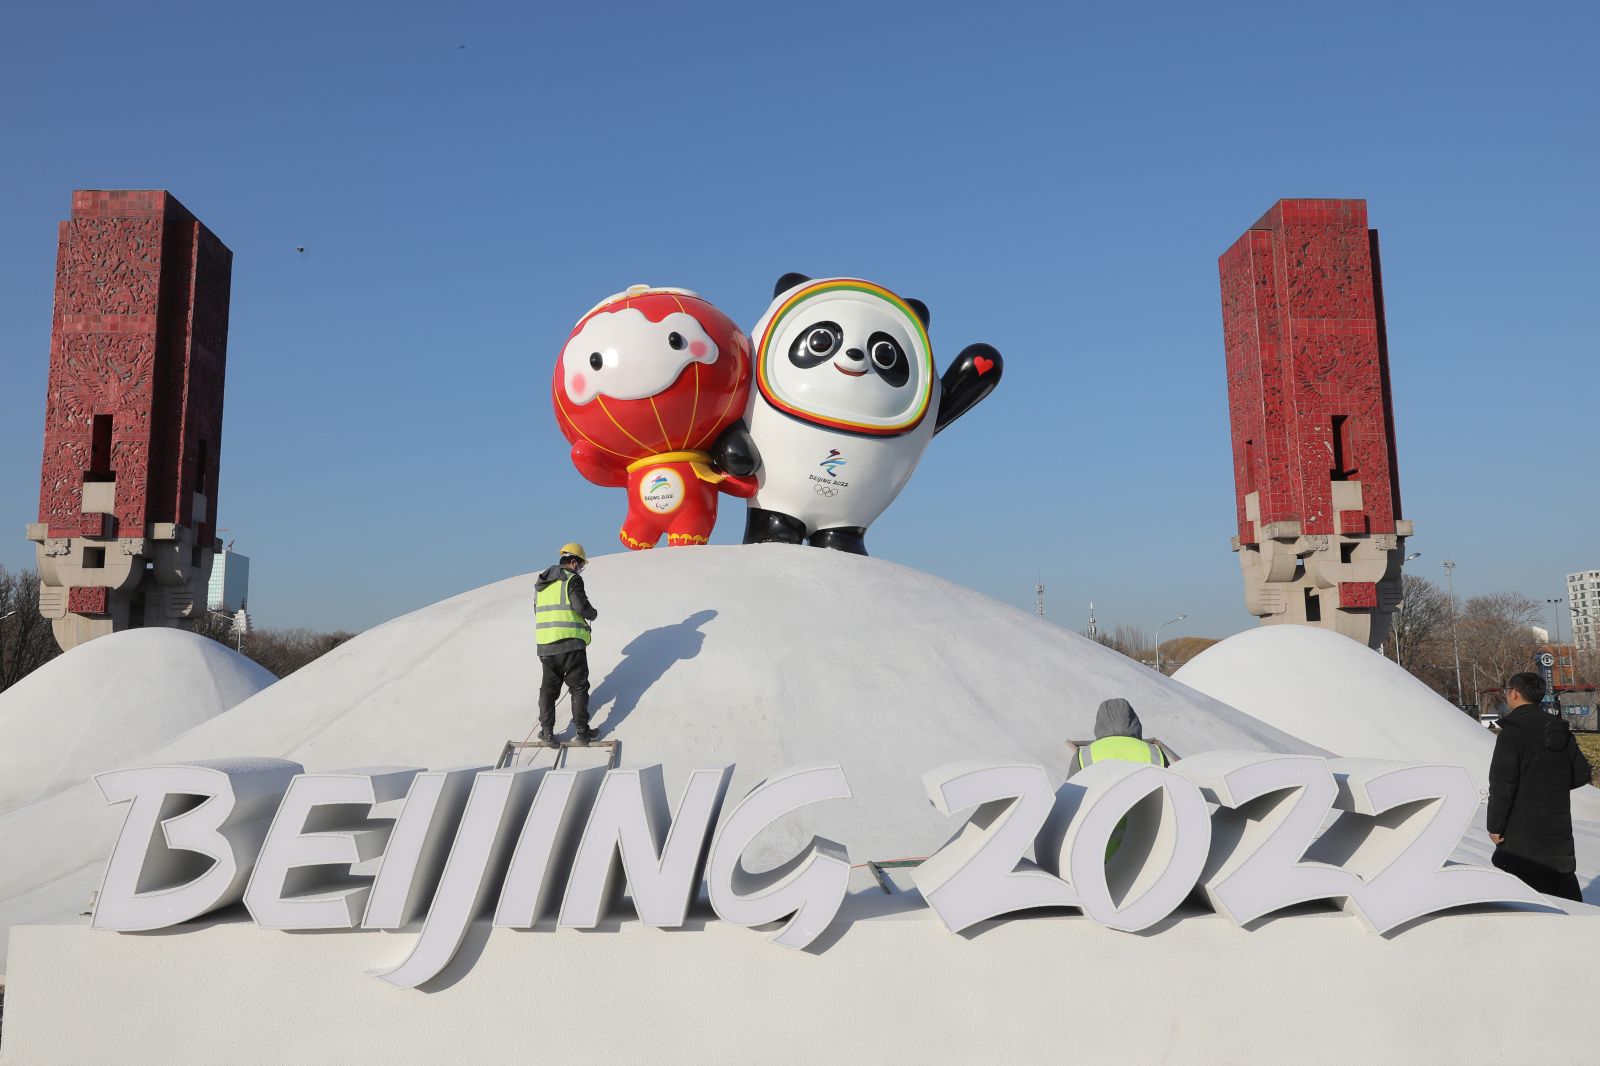 epa09678214 Chinese workers spray paint near the Bing Dwen Dwen, the Beijing 2022 Winter Olympic Mascot and Shuey Rhon Rhon, the 2022 Beijing Winter Paralympic Games Mascot, in Beijing, China, 11 January 2022. China is scheduled to host the Beijing 2022 Olympic and Paralympic Winter Games in February, making its capital the first city in the world to host both Summer (2008) and Winter Olympics (2022).  EPA/WU HONG